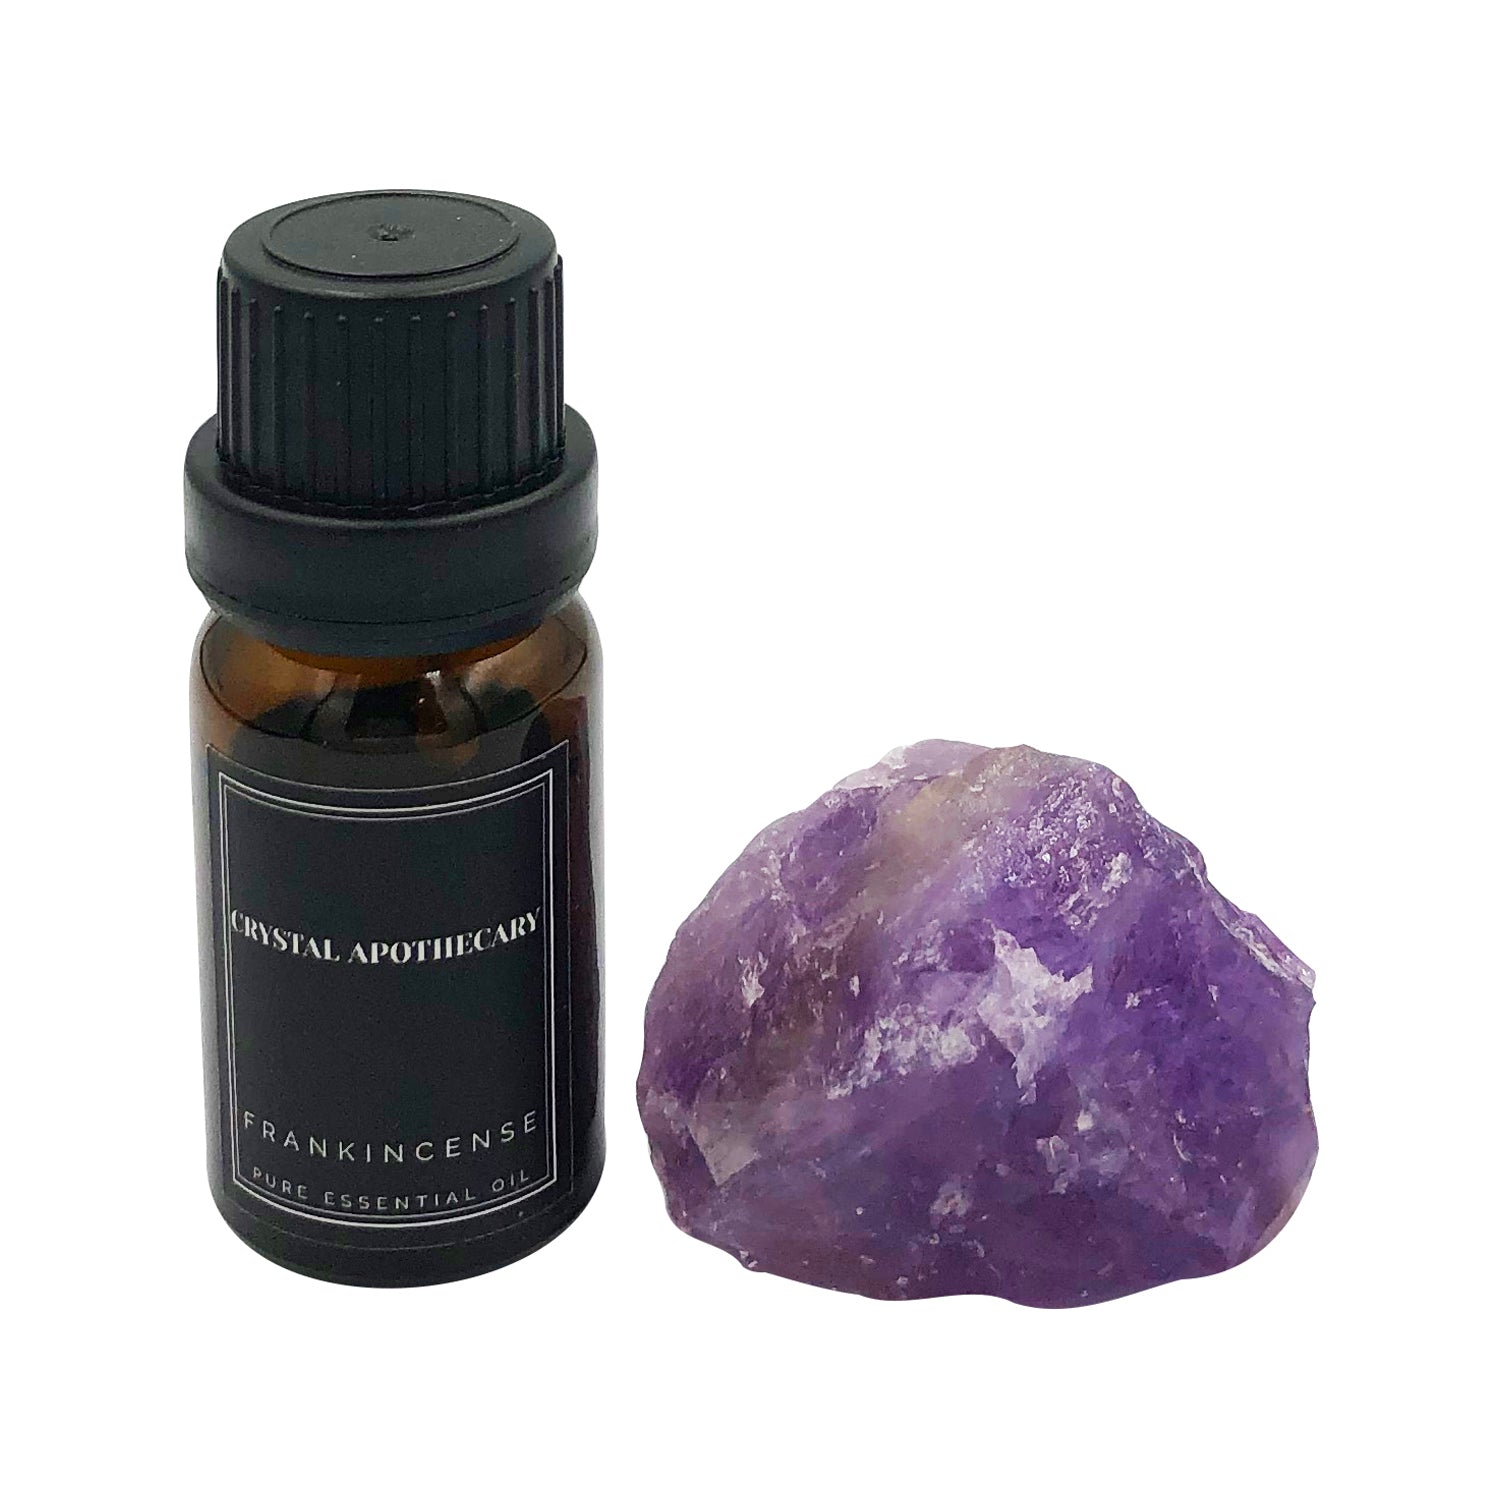 Frankincense Pure Essential Oil with Amethyst